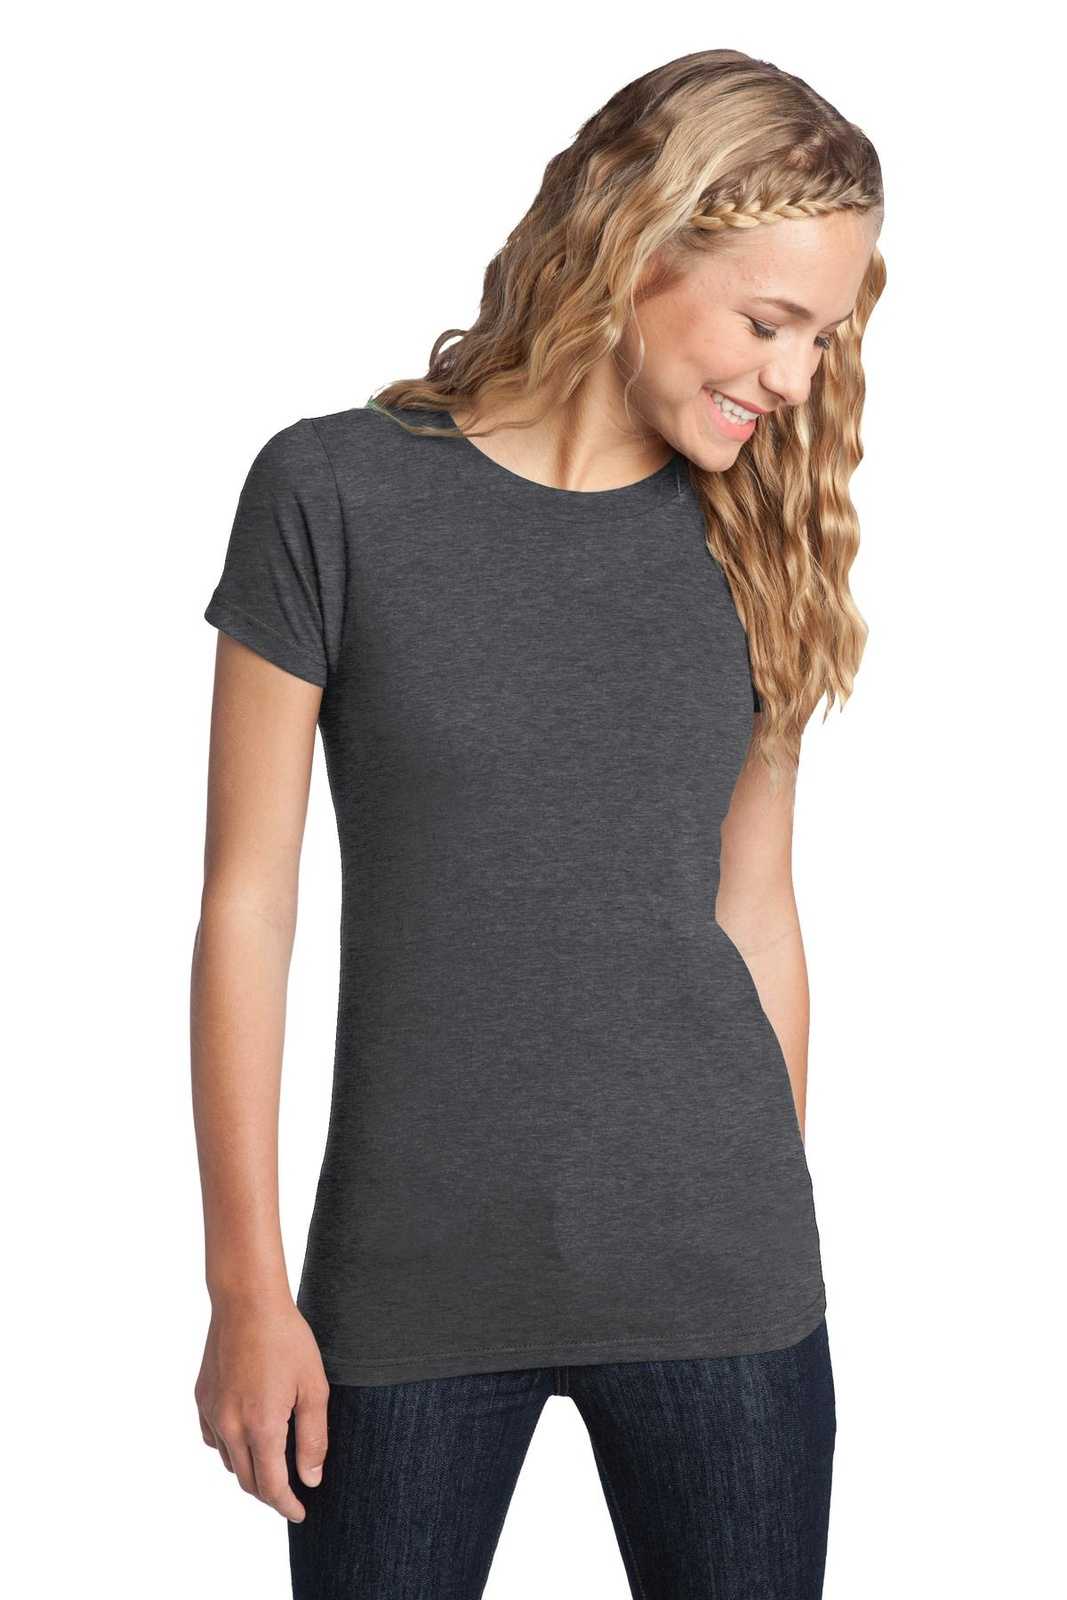 District DT5001 Women's Fitted The Concert Tee - Heathered Charcoal - HIT a Double - 1